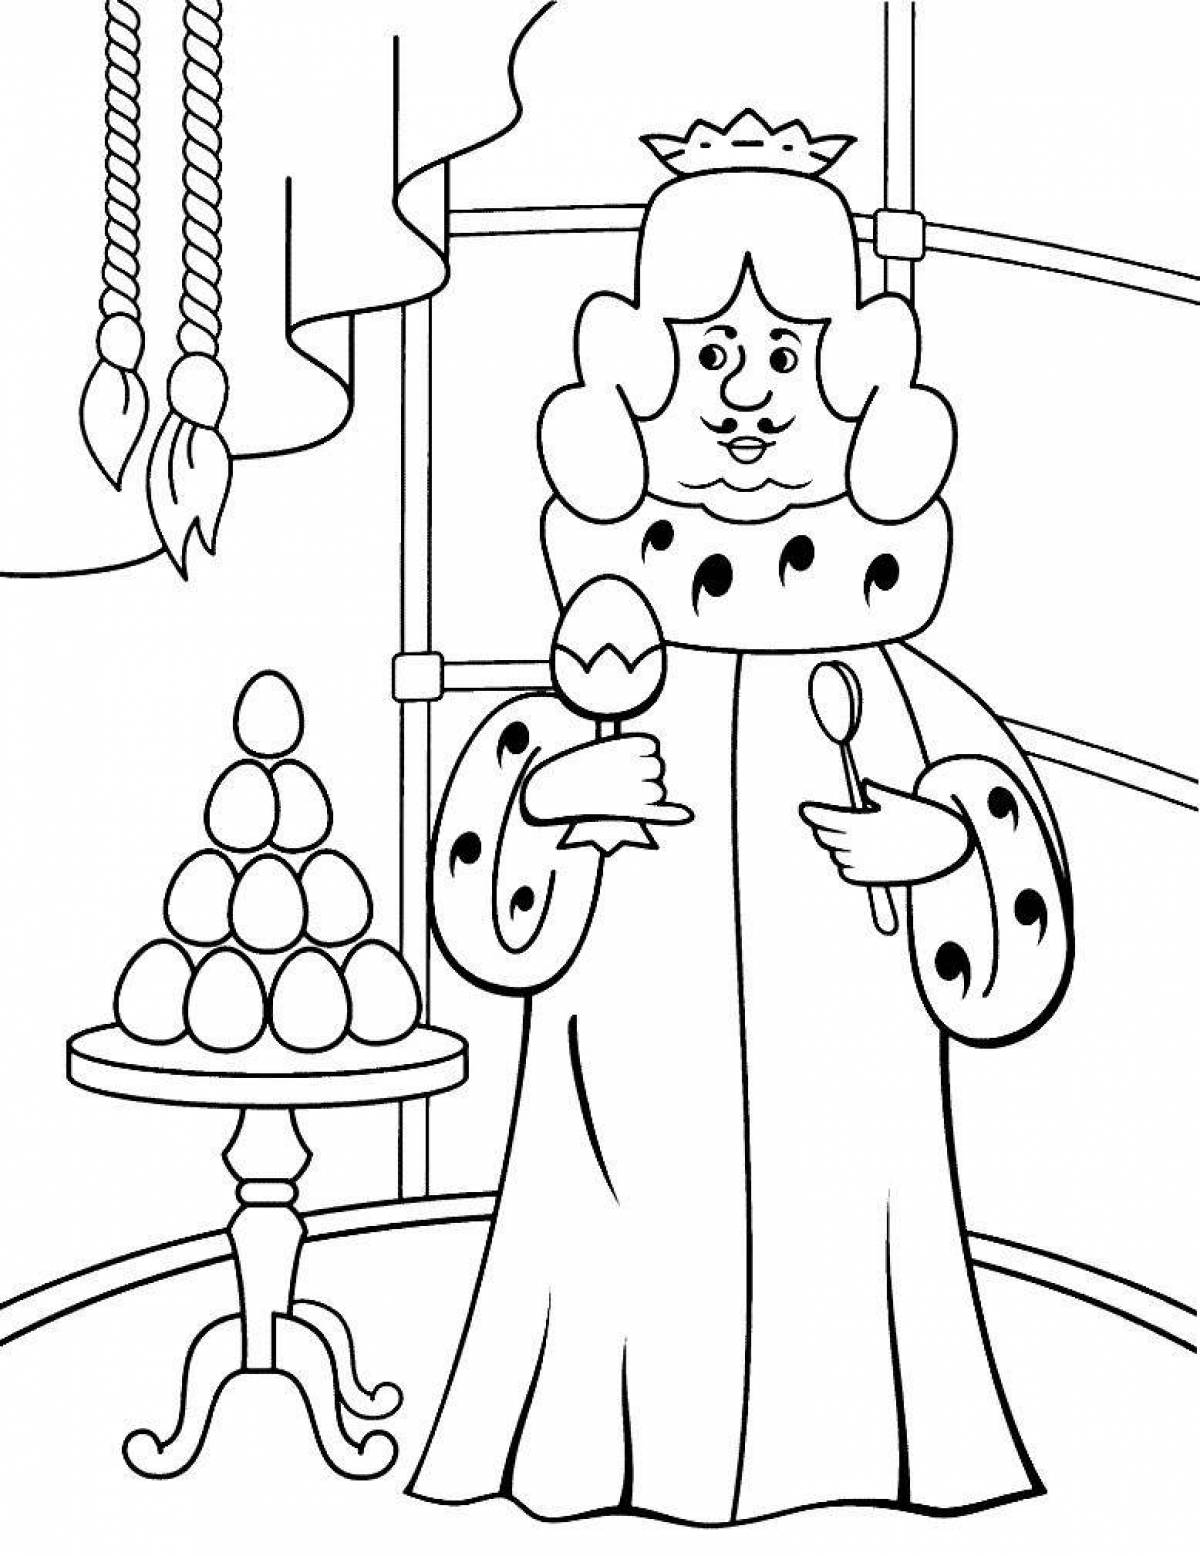 Great king coloring book